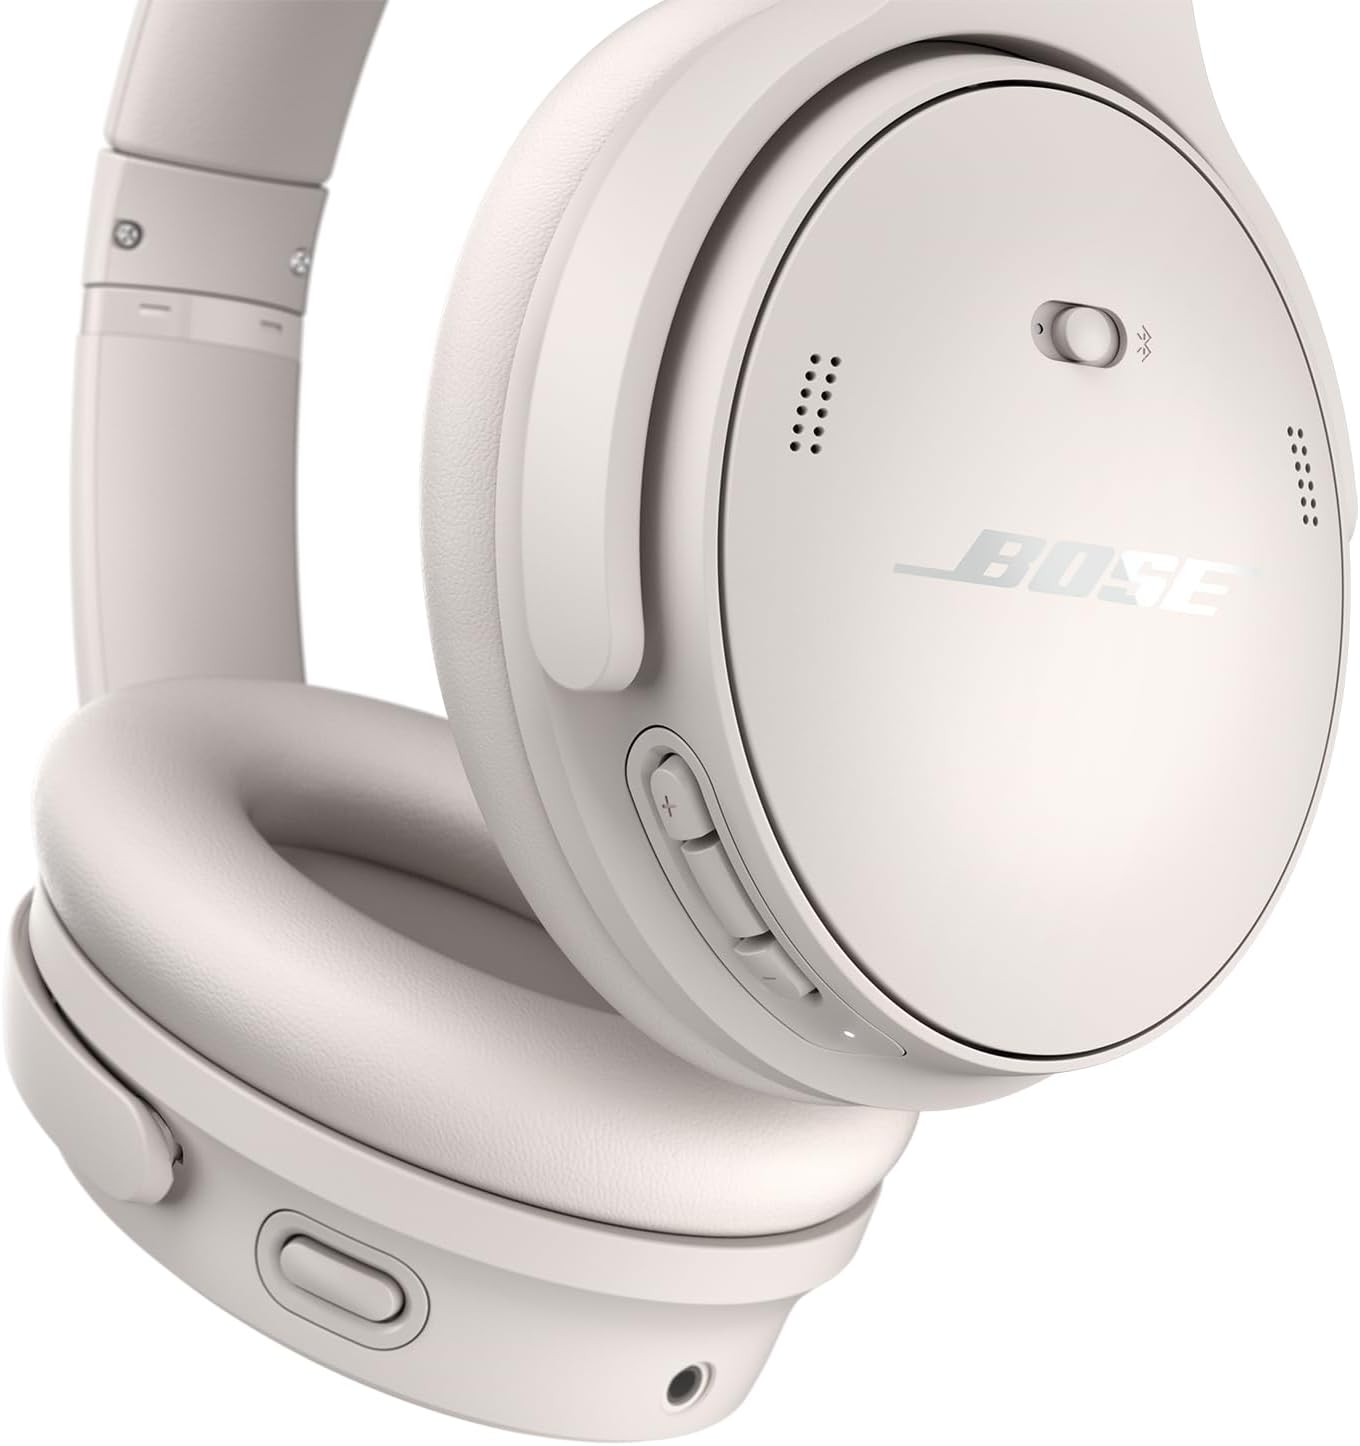 Bose QuietComfort Wireless Noise Cancelling Over Ear Headphones - White Smoke (Certified Refurbished)